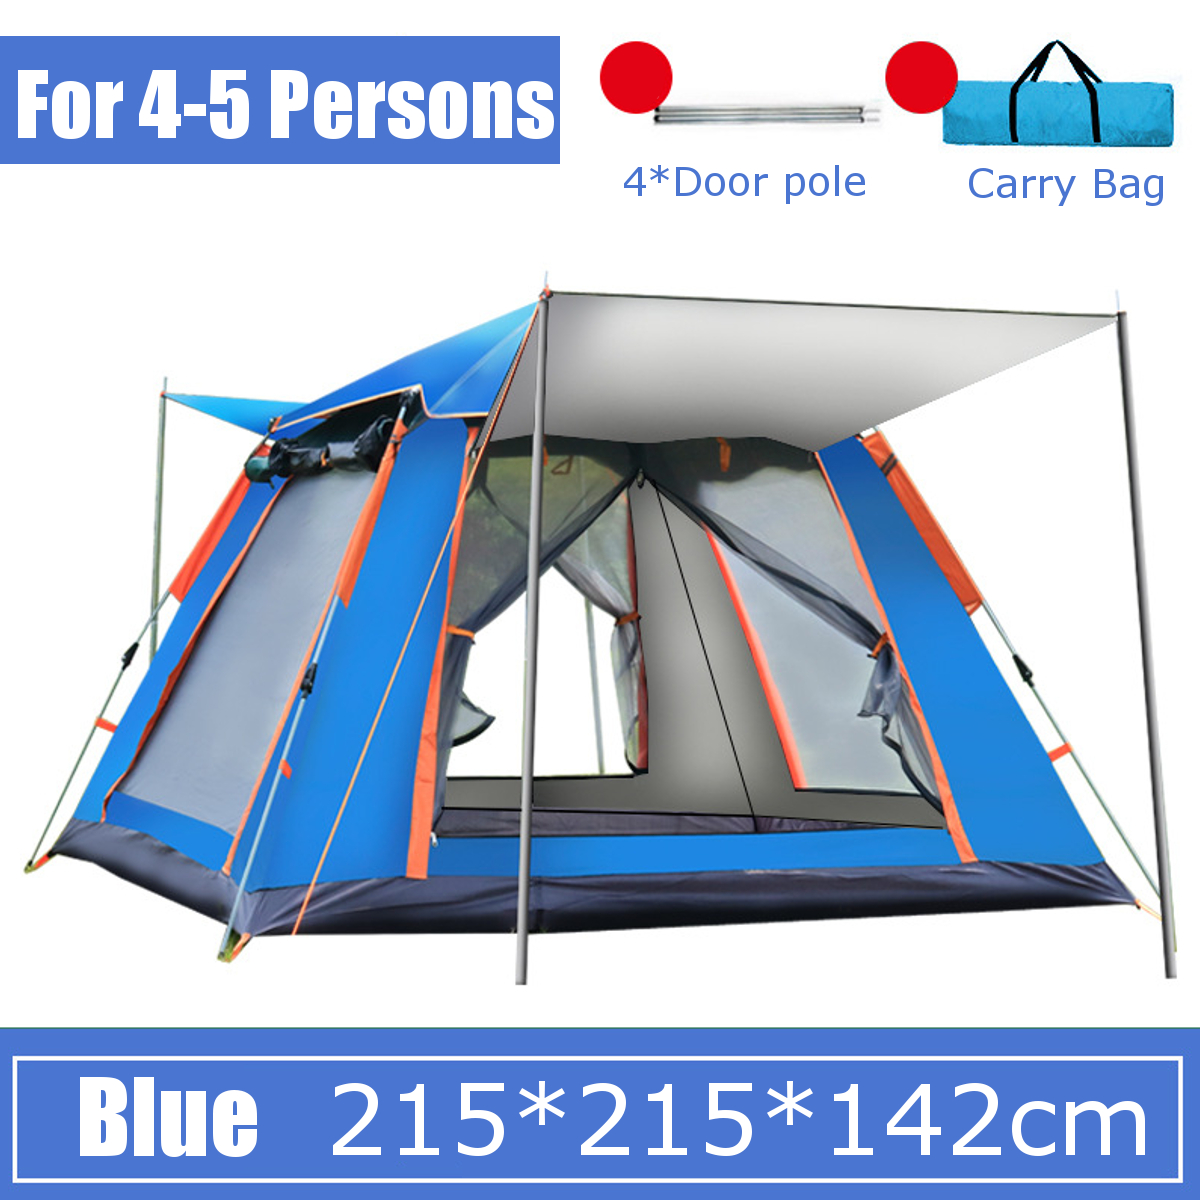 4-5 People Camping Automatic Outdoor Instant Pop Up Tent Bea